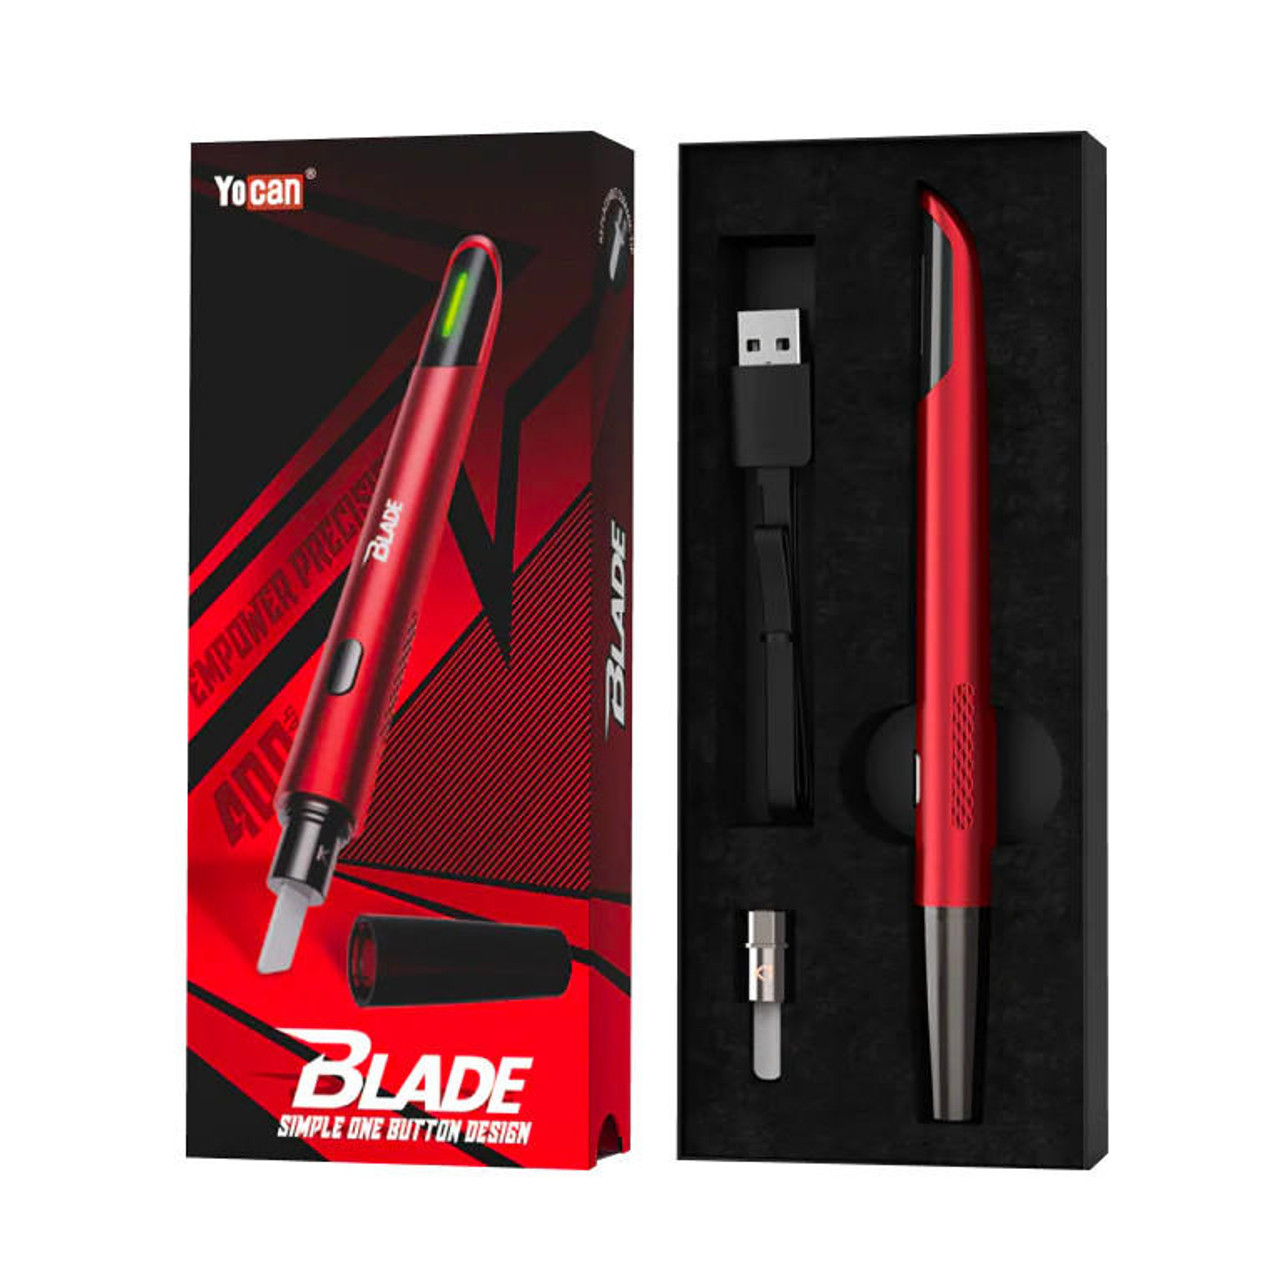 Yocan Hot Knife Electric Dab Tool and Dab Thermometer: Jaws